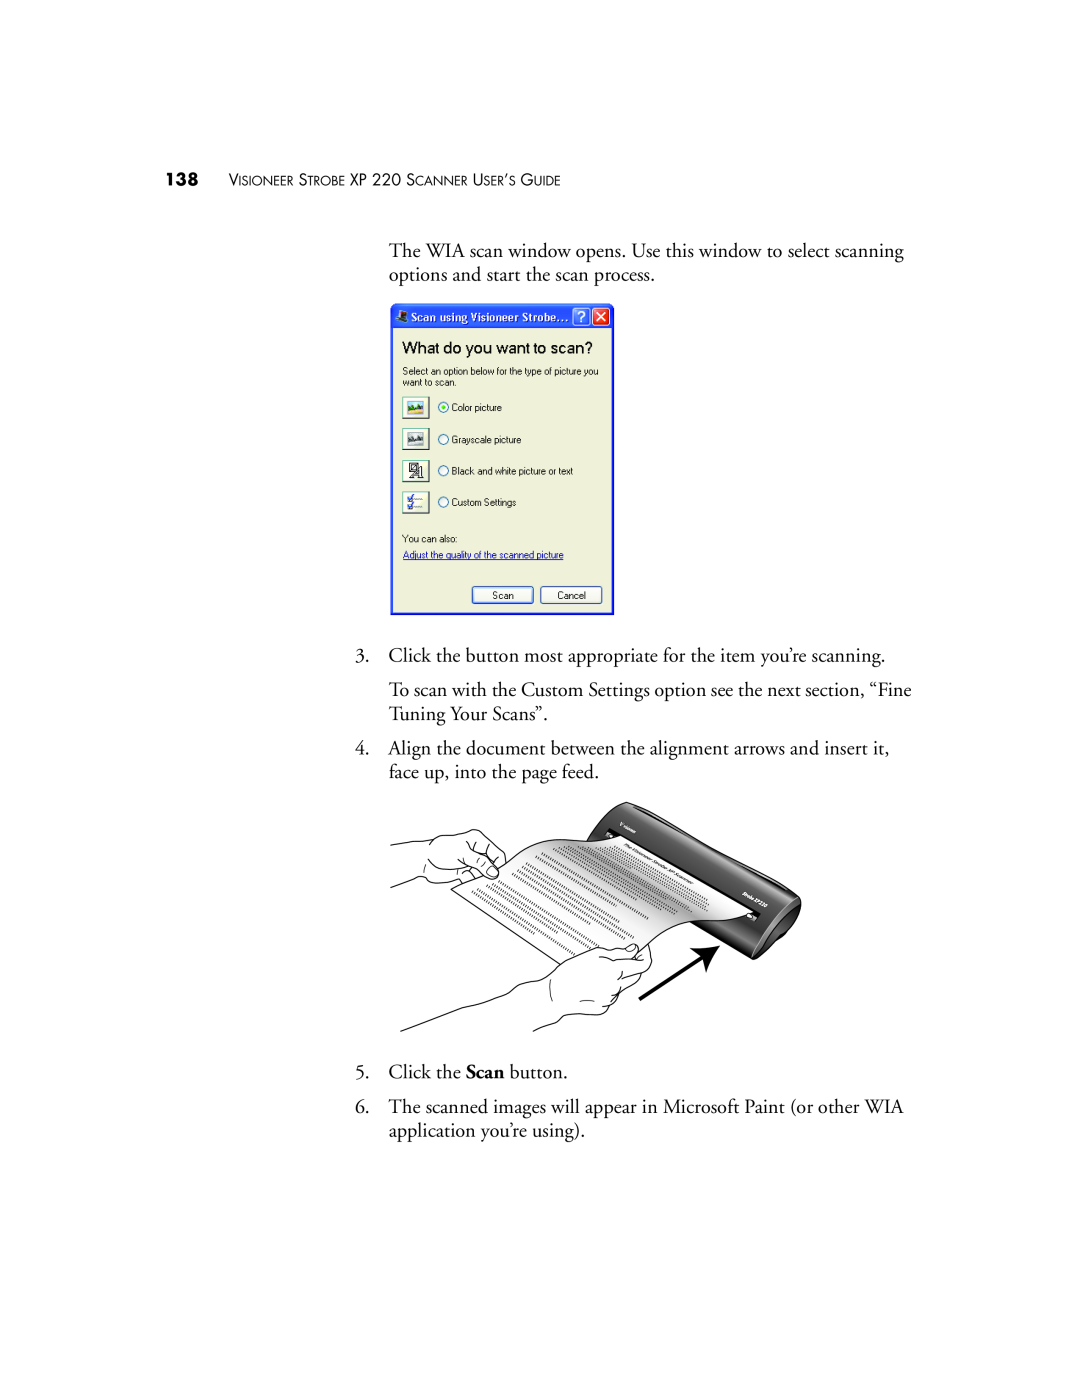 Visioneer XP220 manual Click the button most appropriate for the item you’re scanning 